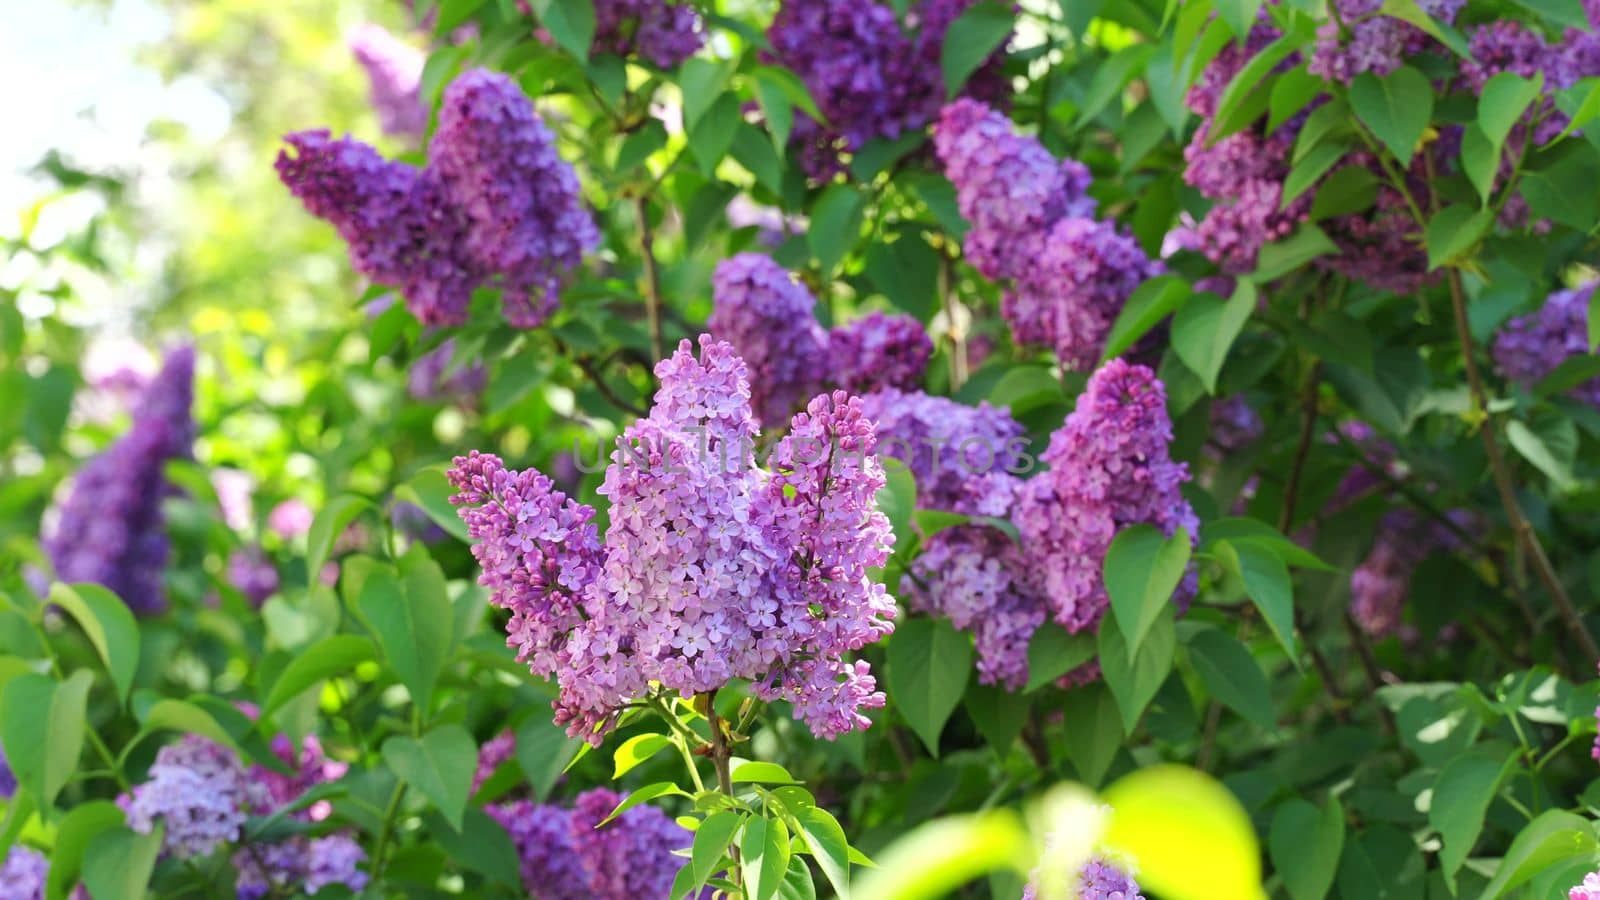 Blossom lilac flowers in spring in garden. branch of Blossoming purple lilacs in spring. Blooming lilac bush. Spring season, nature background